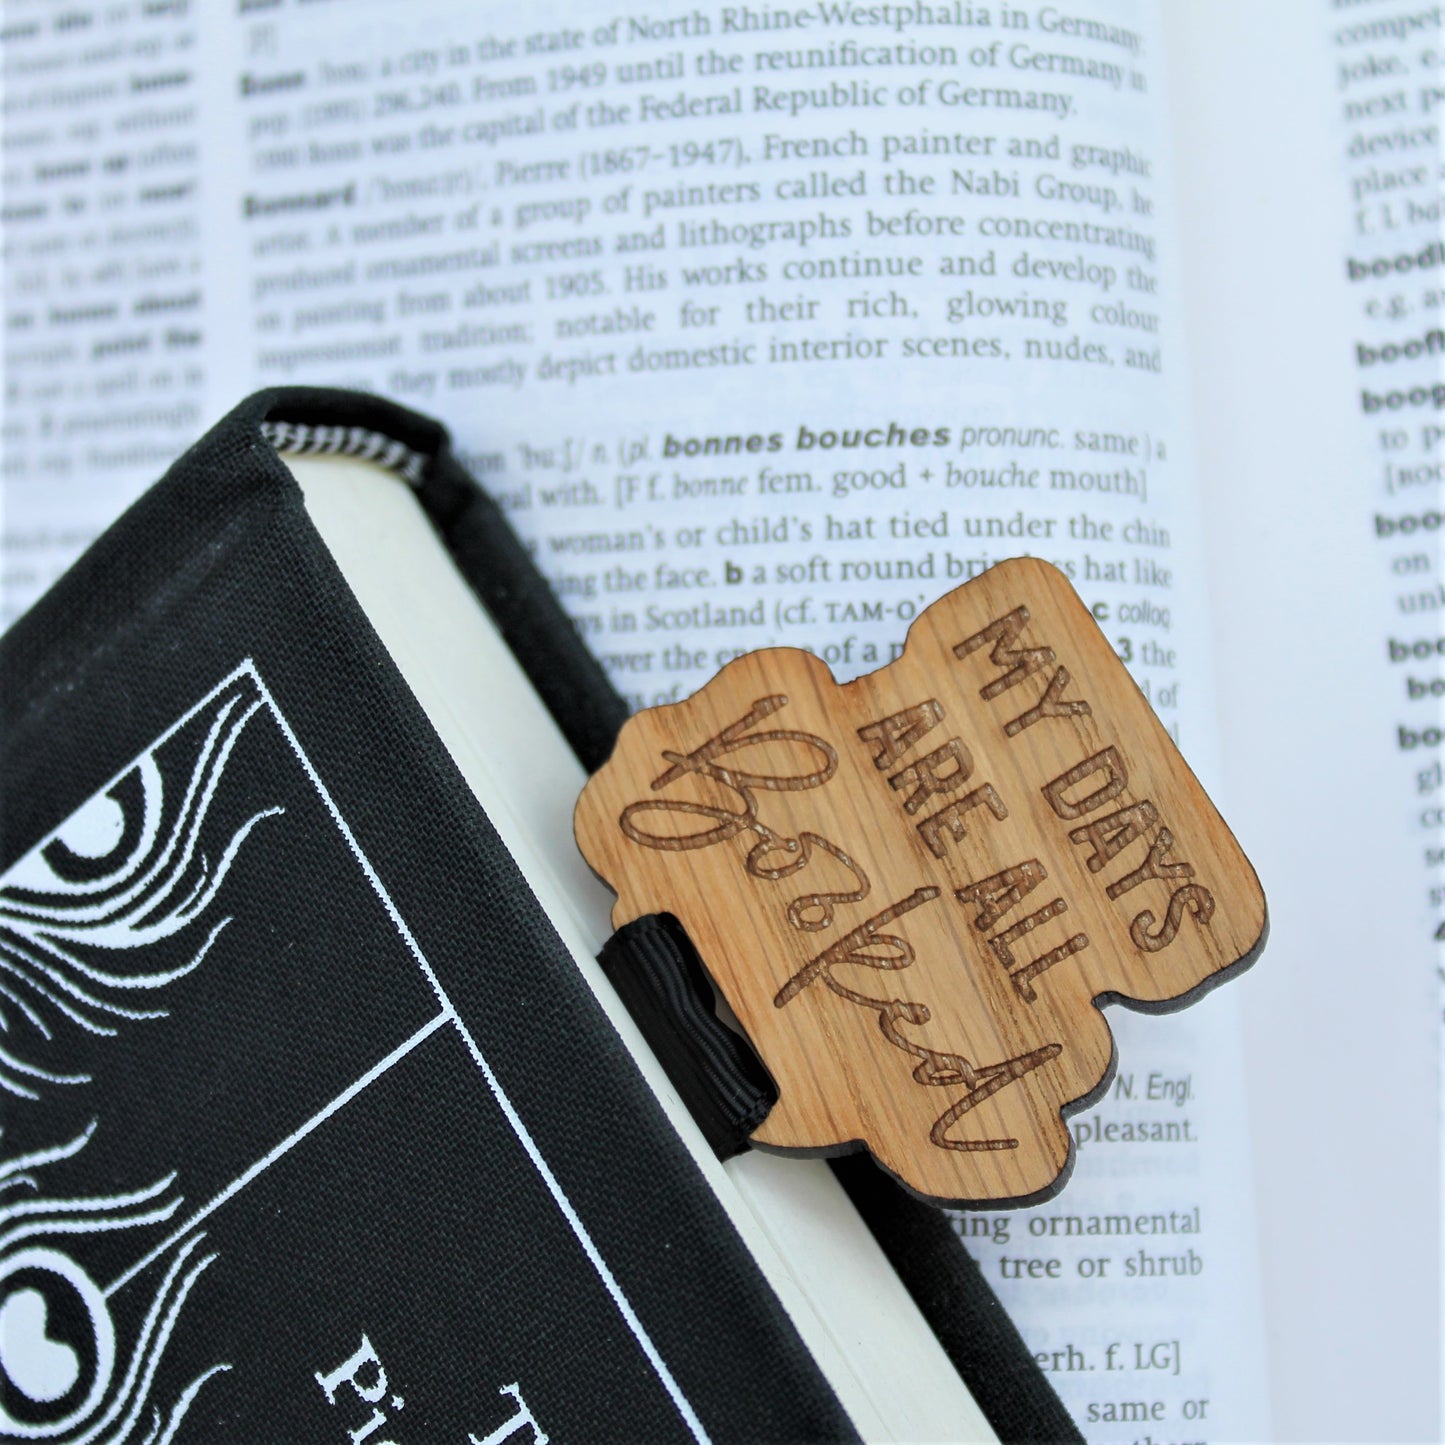 My Days Are All Booked Bookmark